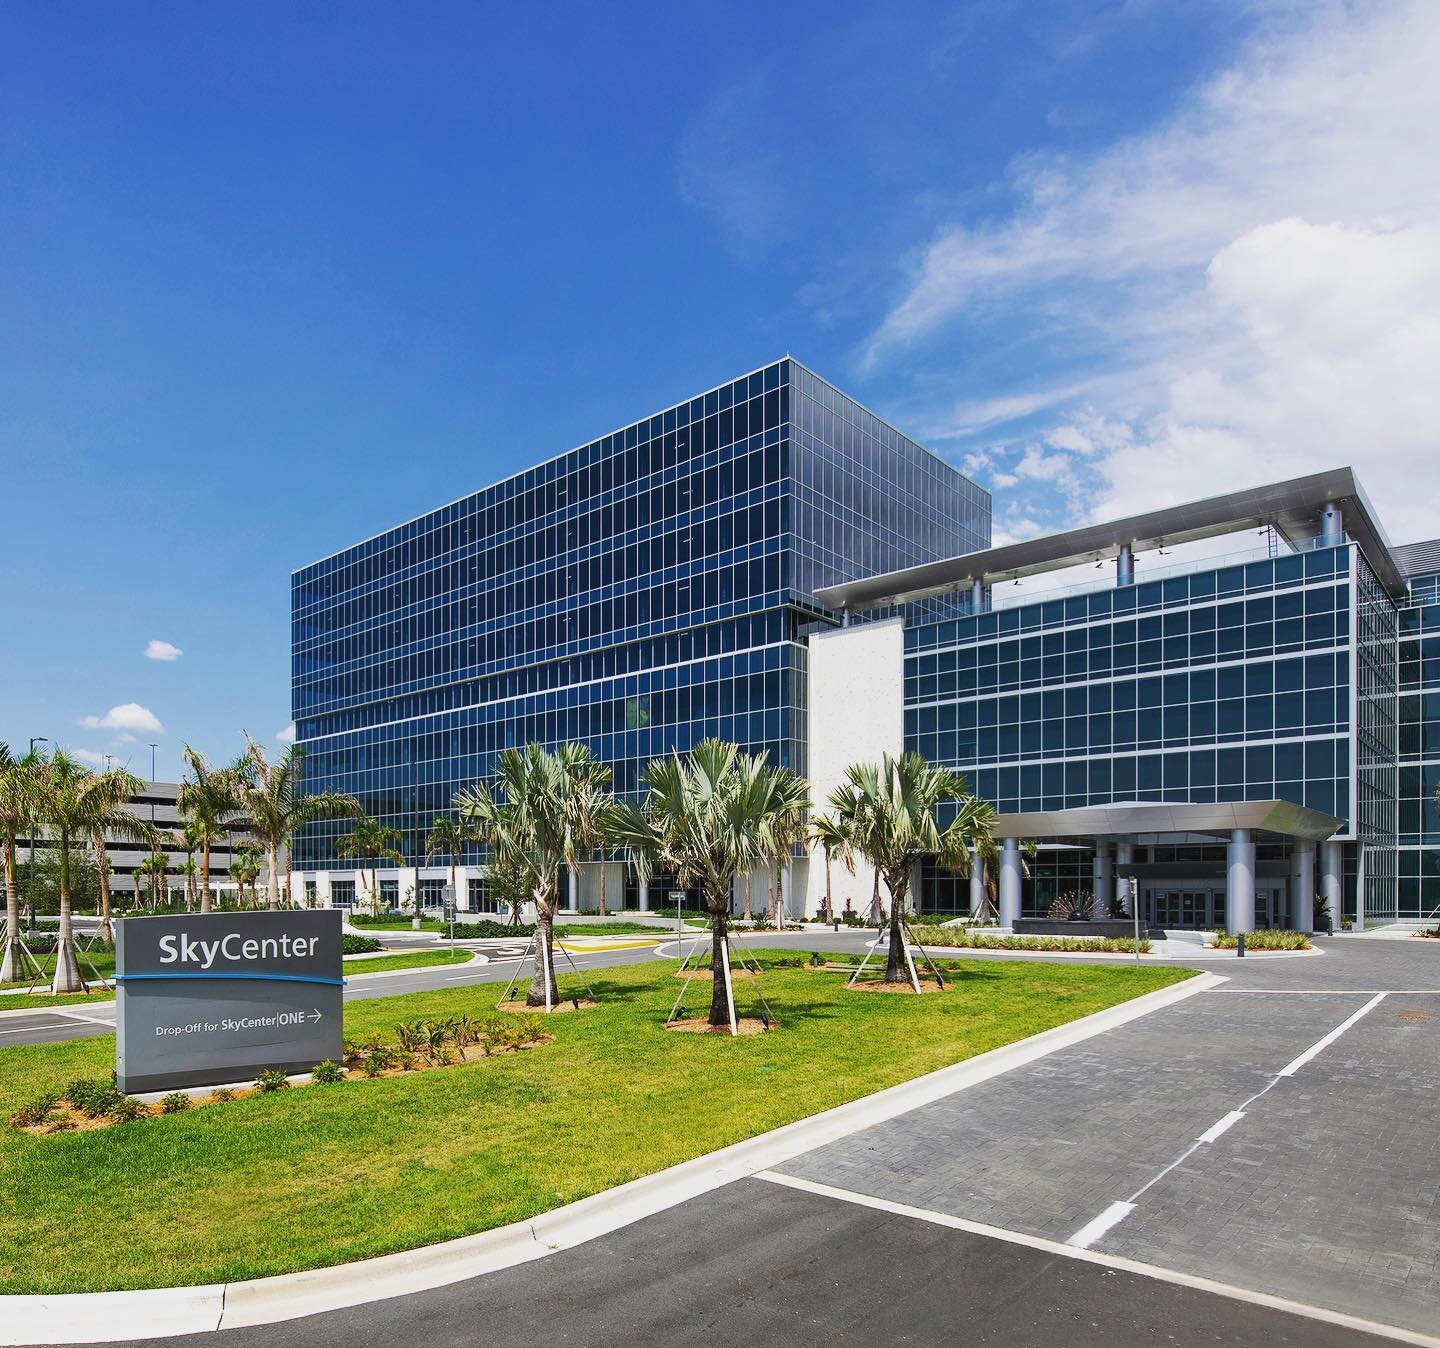 Tampa International Airport is going green! Check out all the latest updates with a special tour guided by USGBC on Friday, April 21st . This walking tour features the LEED Platinum SkyCenter One office with the airport&rsquo;s new Sustainability and